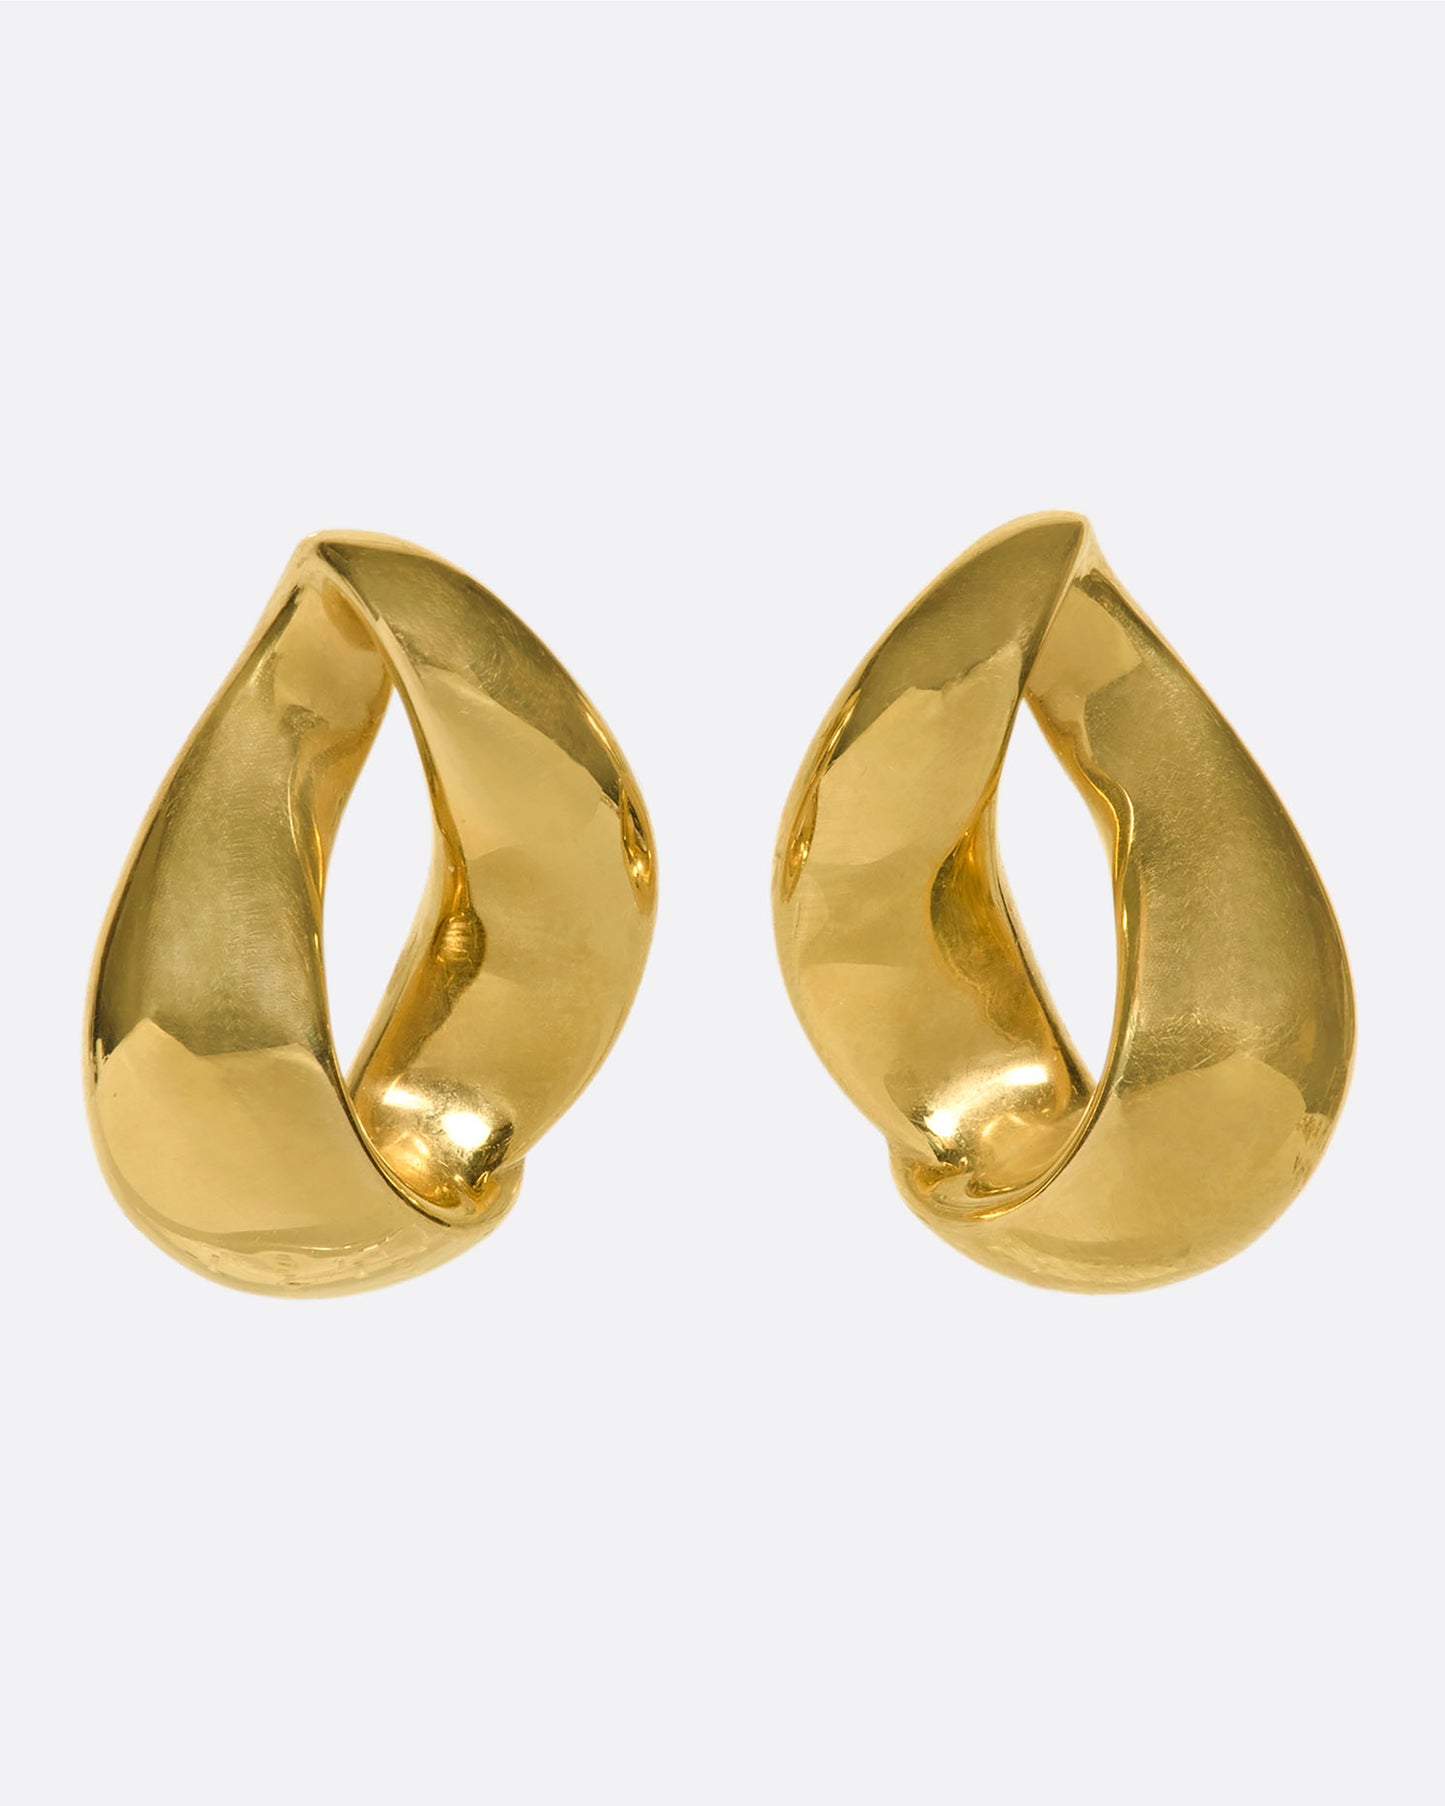 An elegant pair of 18k gold folded-hoop estate stud earrings. These are hollow and lightweight